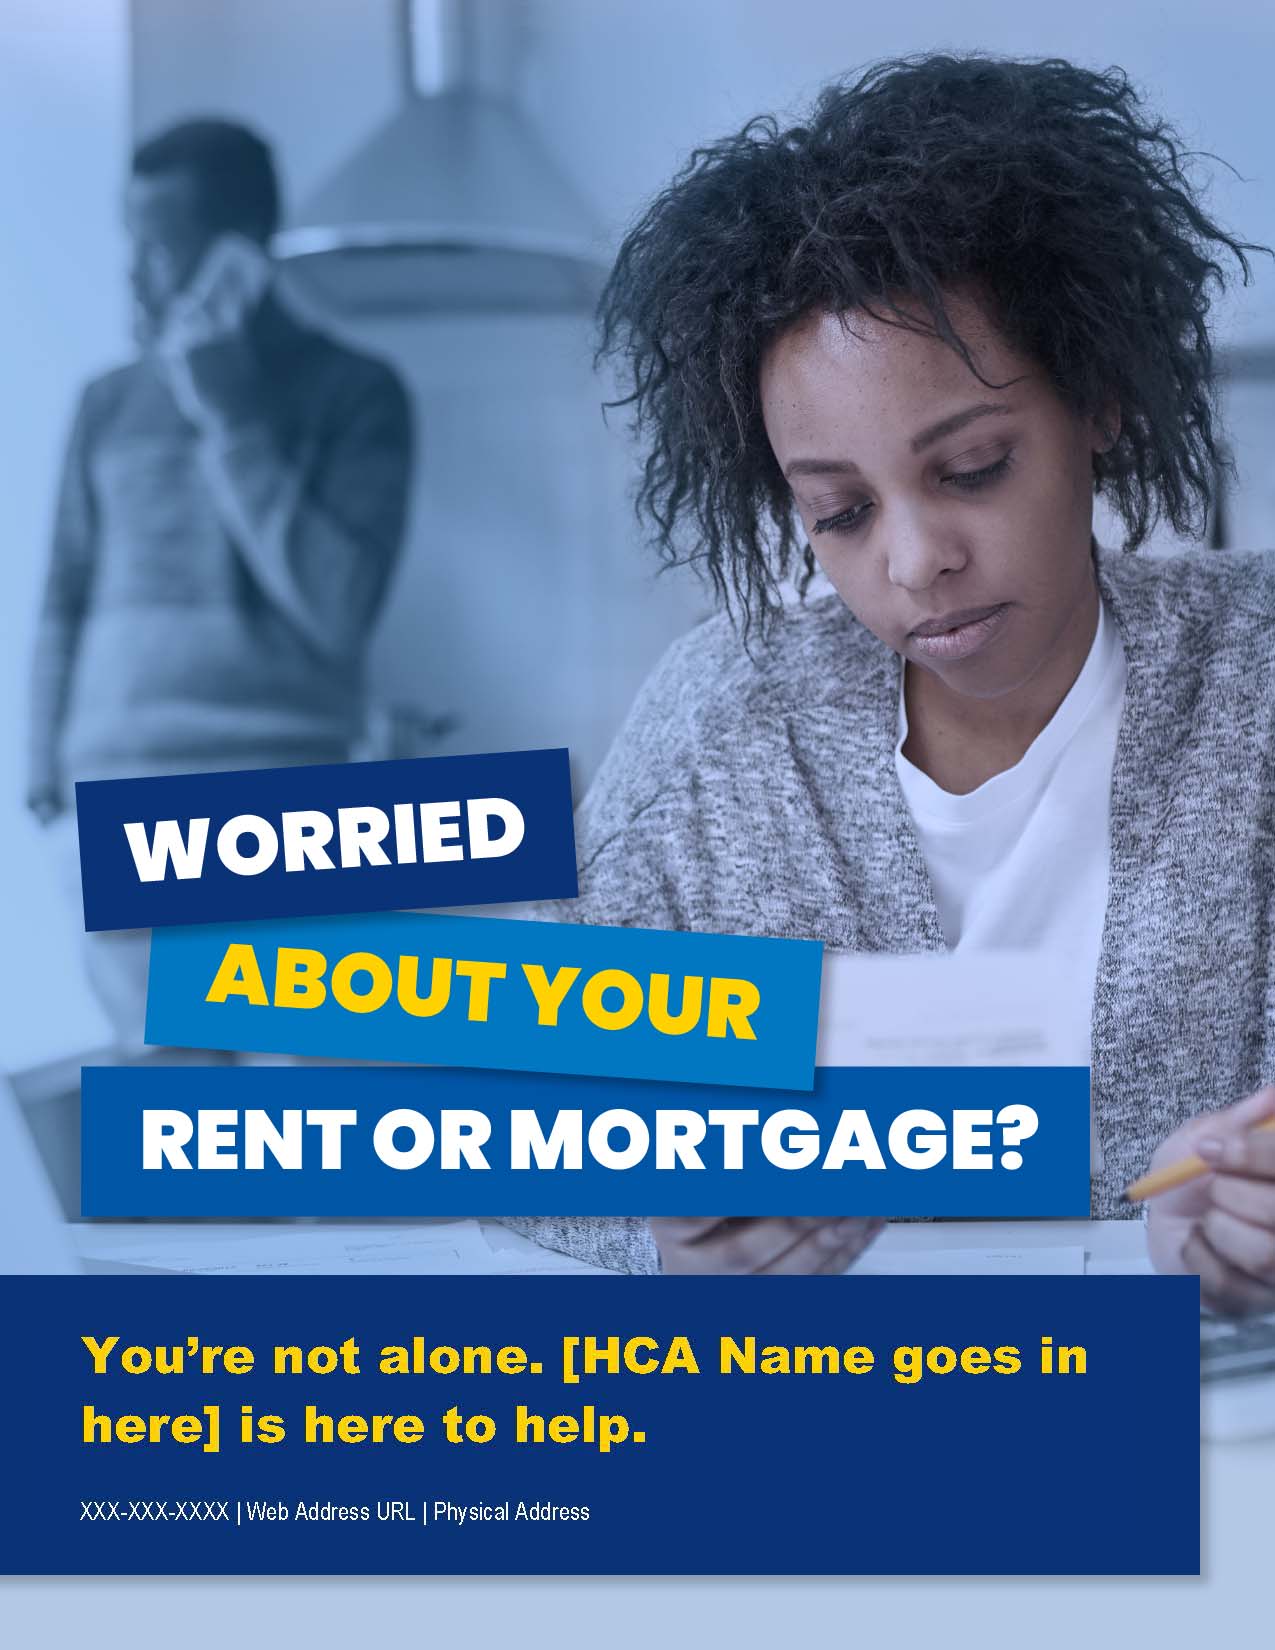 Worried about your rent or mortgage image